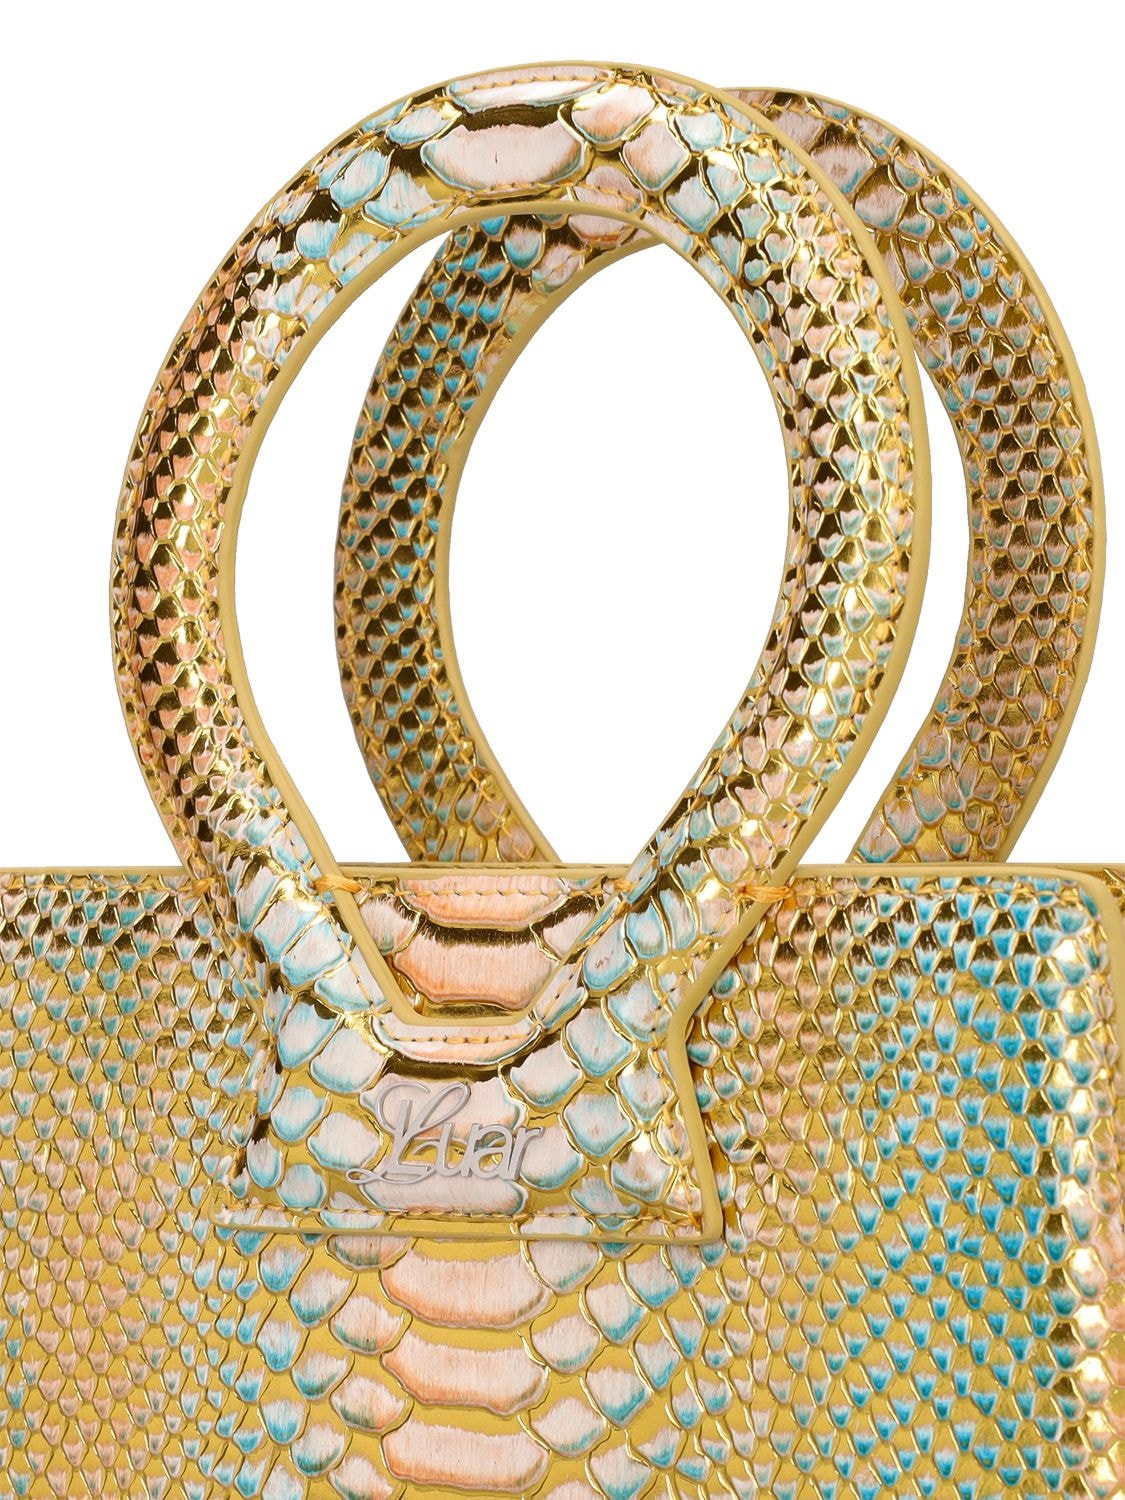 Luar Small Ana Embossed Python Top Handle Bag In Yellow,blue